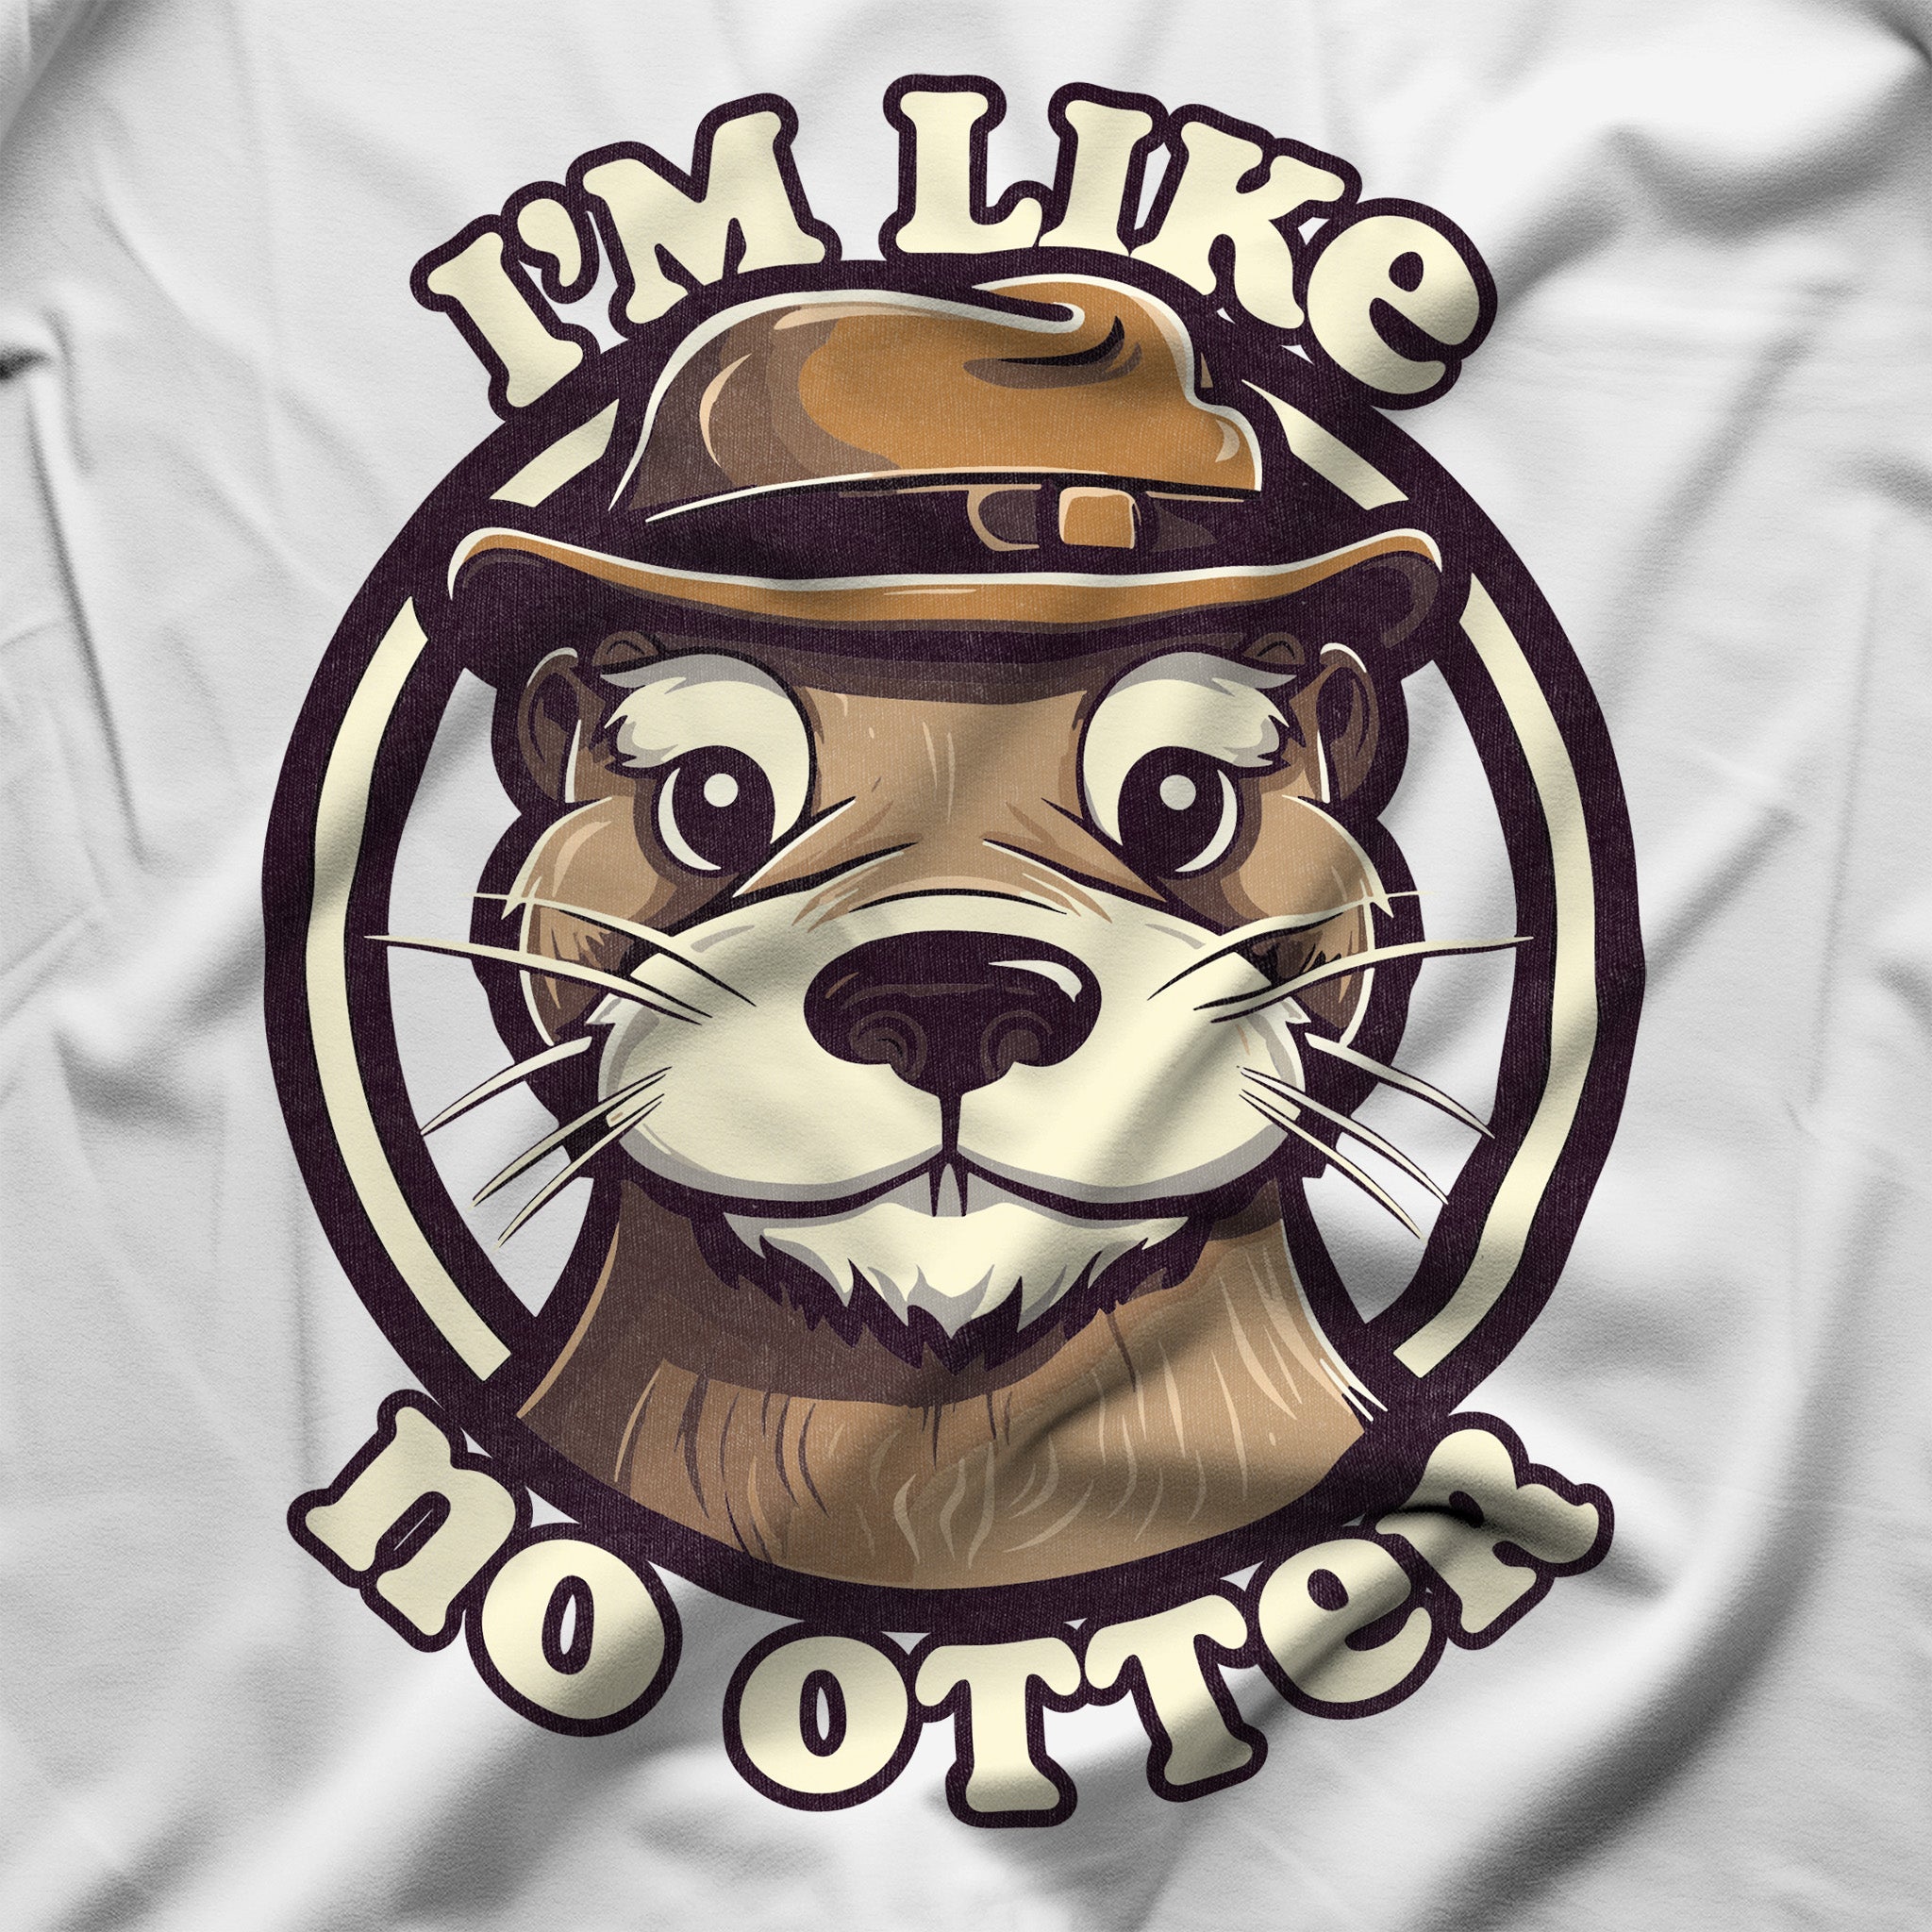 "I'm like no otter" Tank Top - Embrace Your Otter Pride - Hunky Tops#color_white